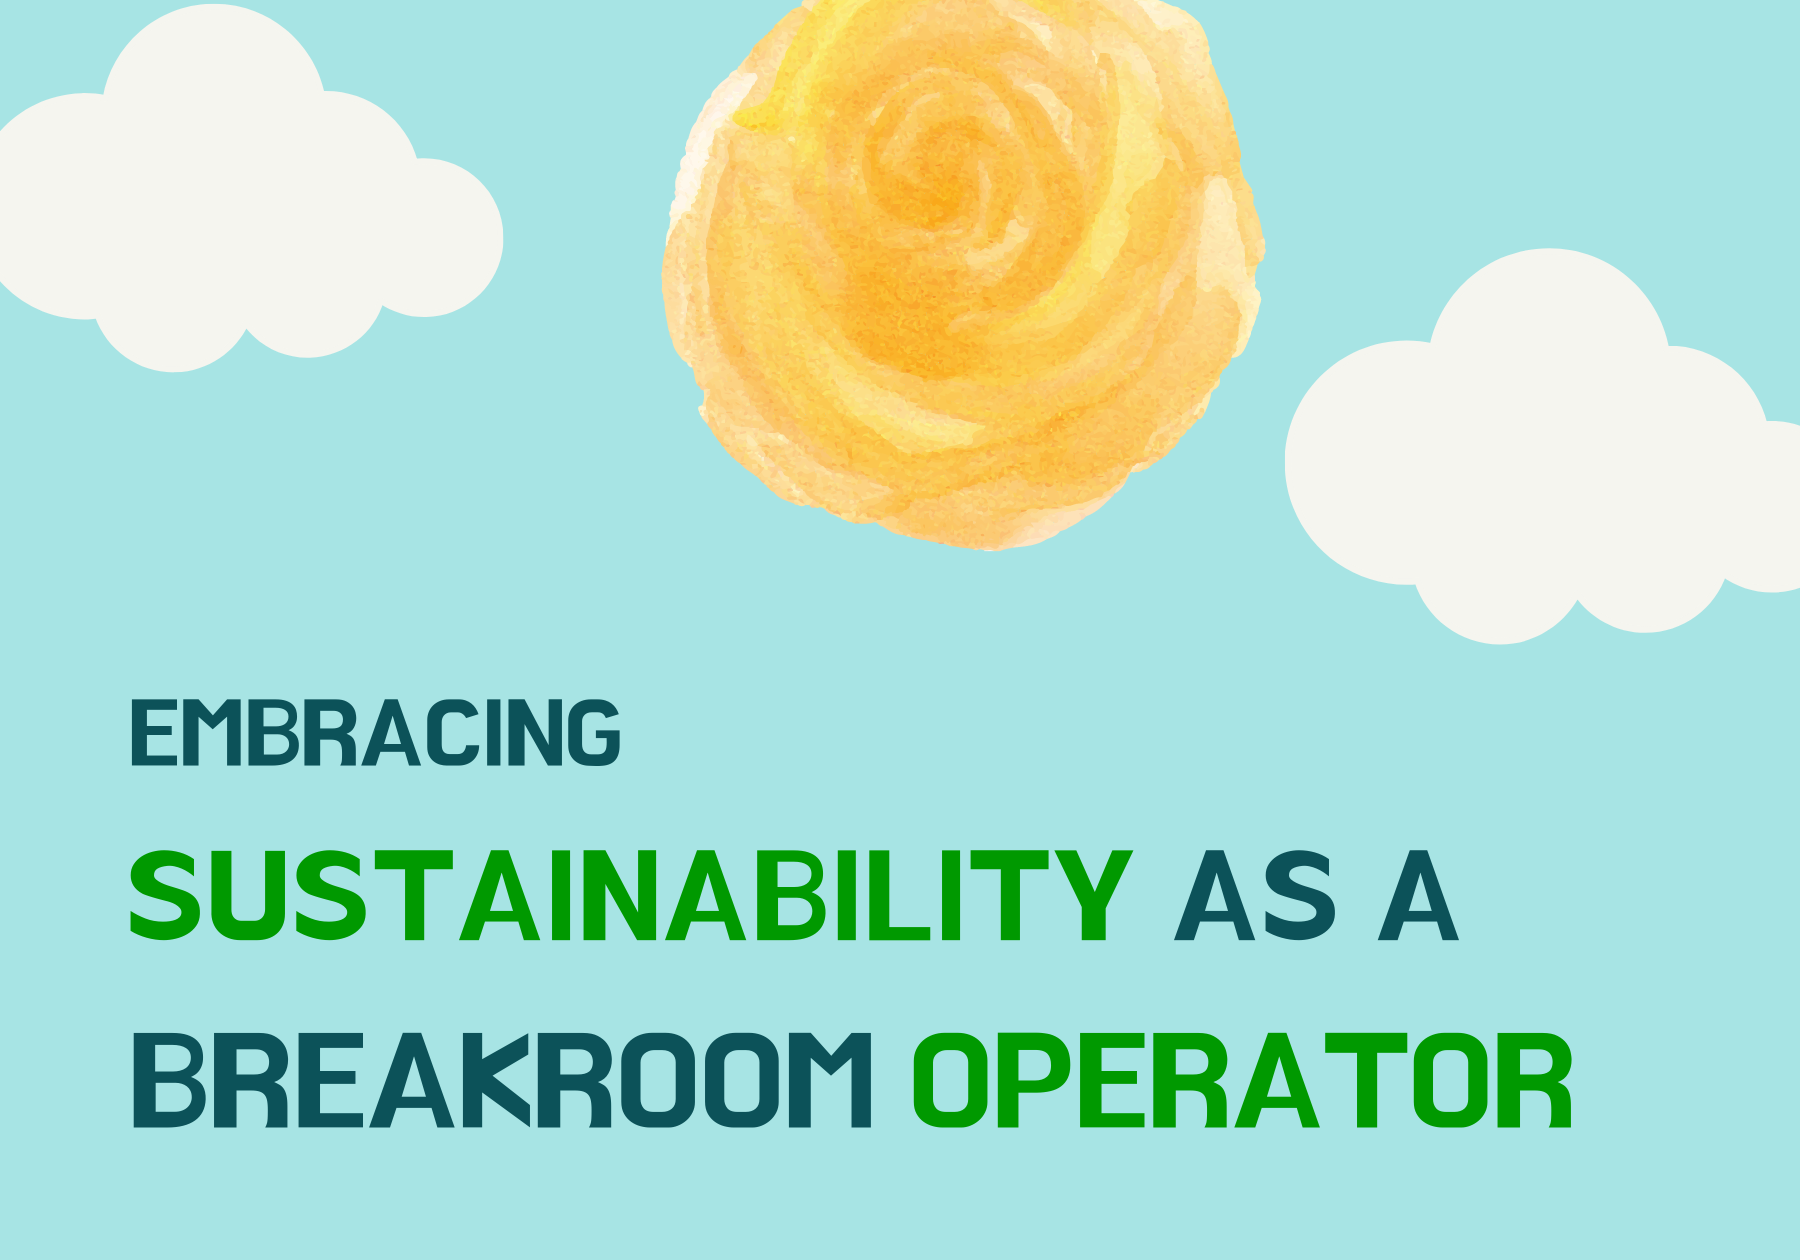 Embracing Sustainability as a Breakroom Operator